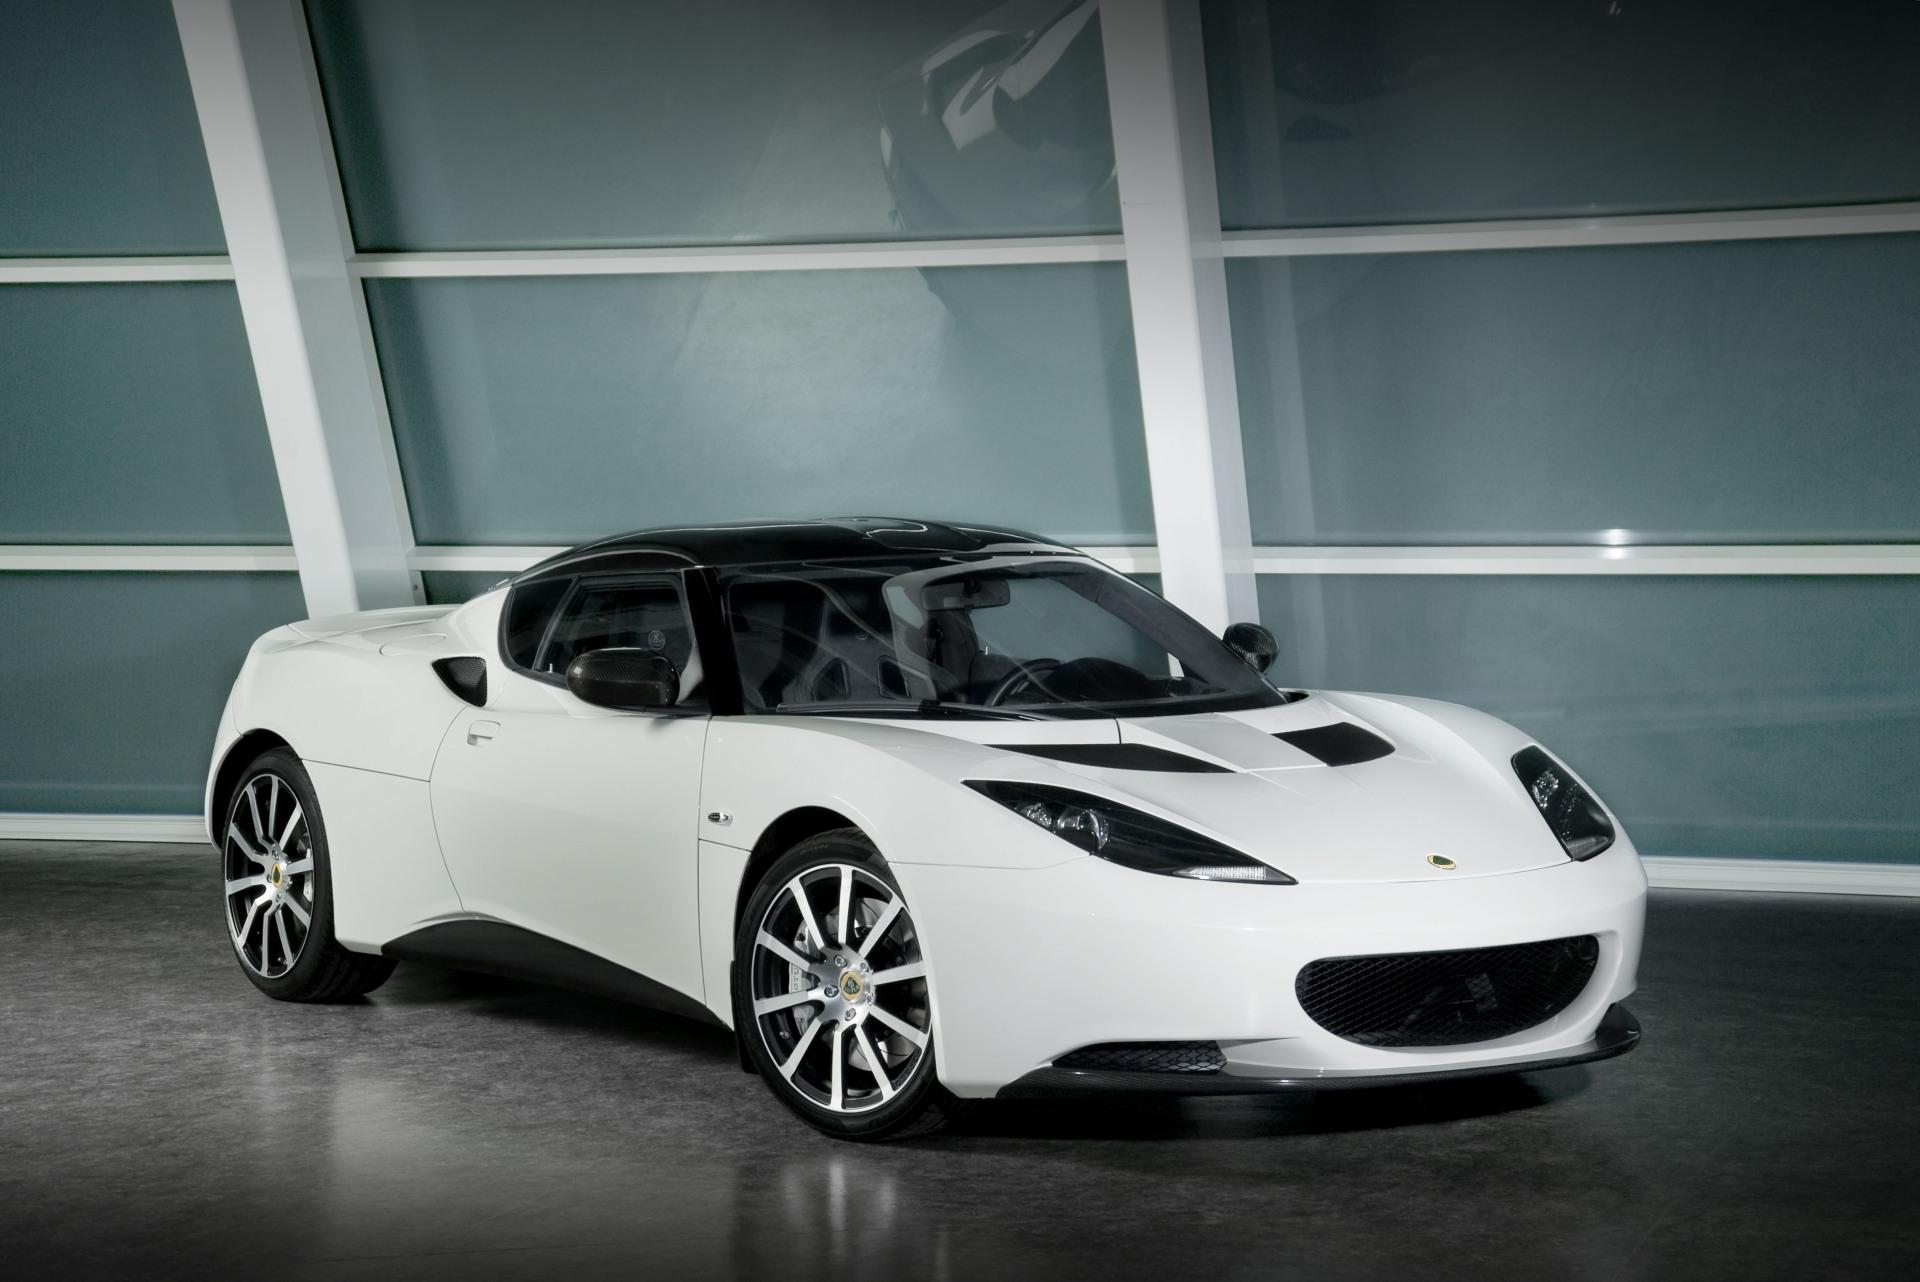 2010 Lotus Evora Carbon Concept News and Information, Research, and Pricing